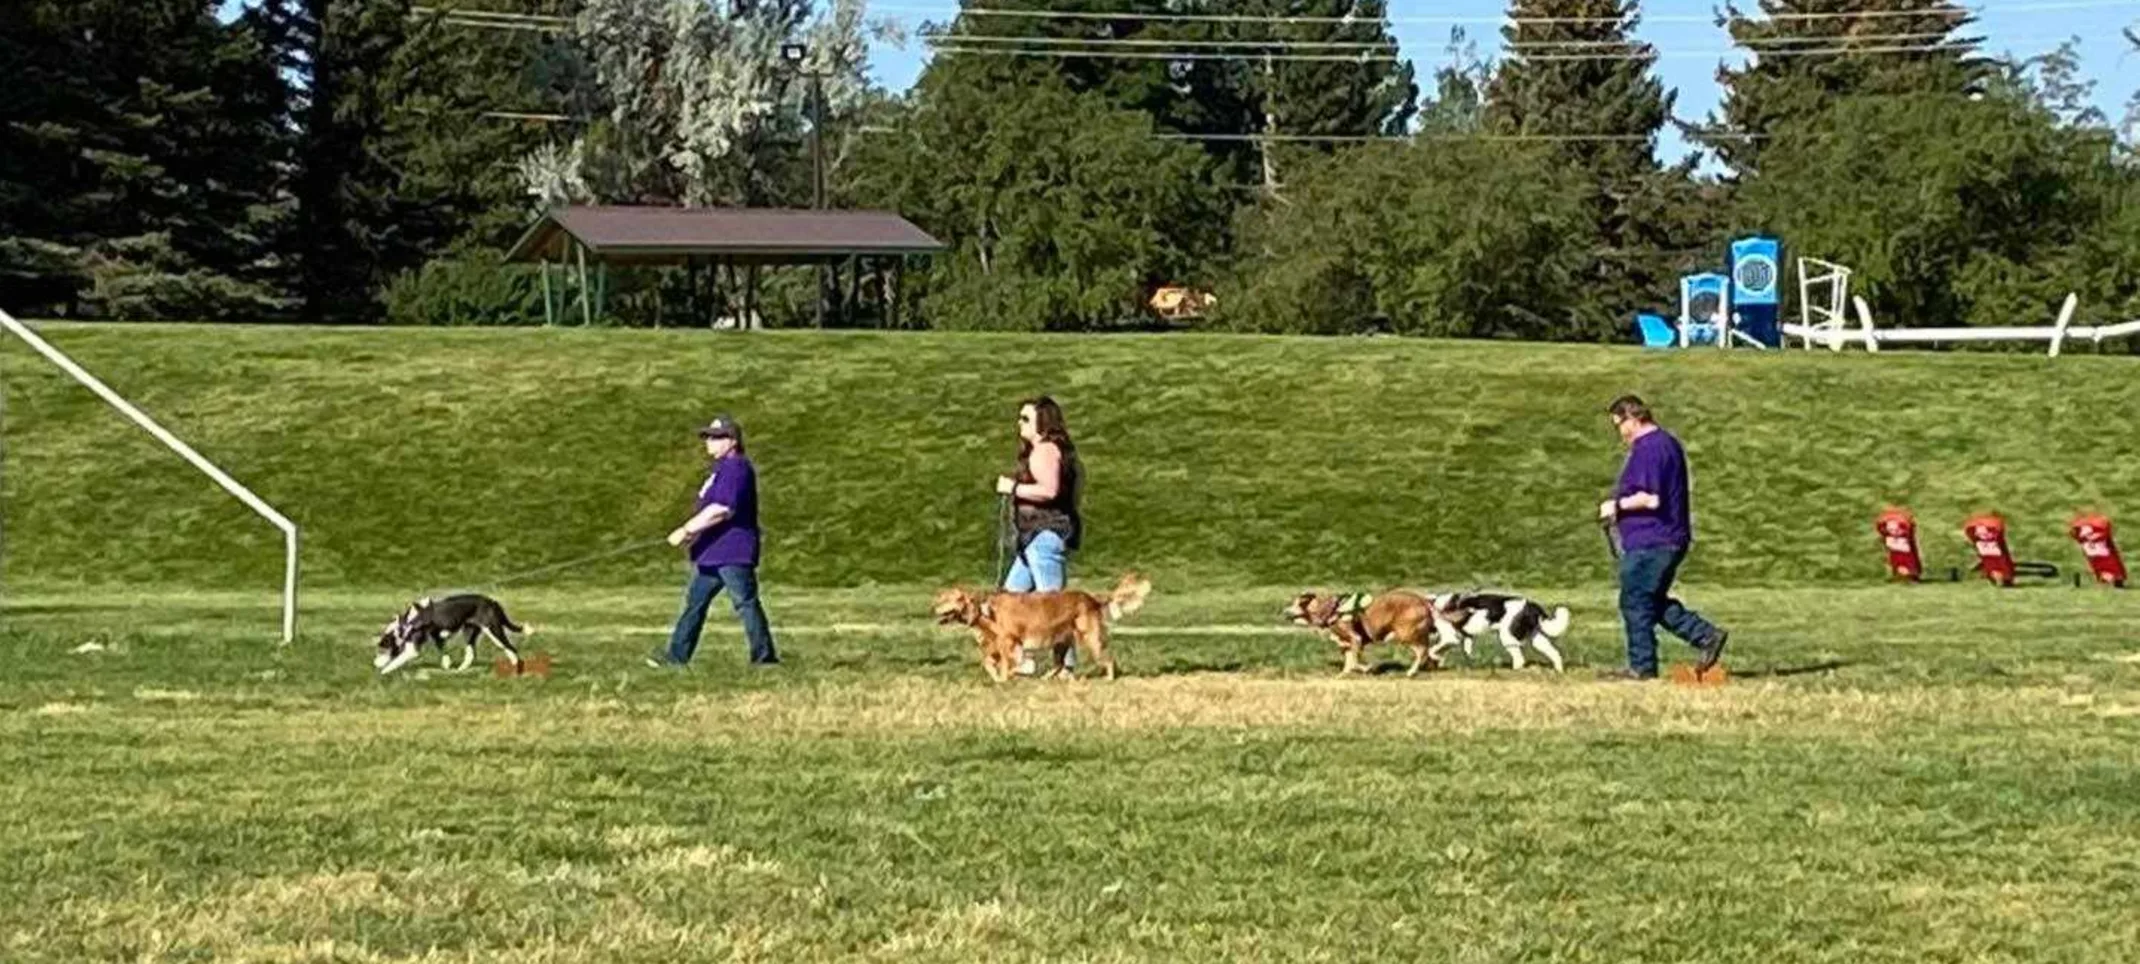 People at afar walking with dogs on green grass with trees at the background.